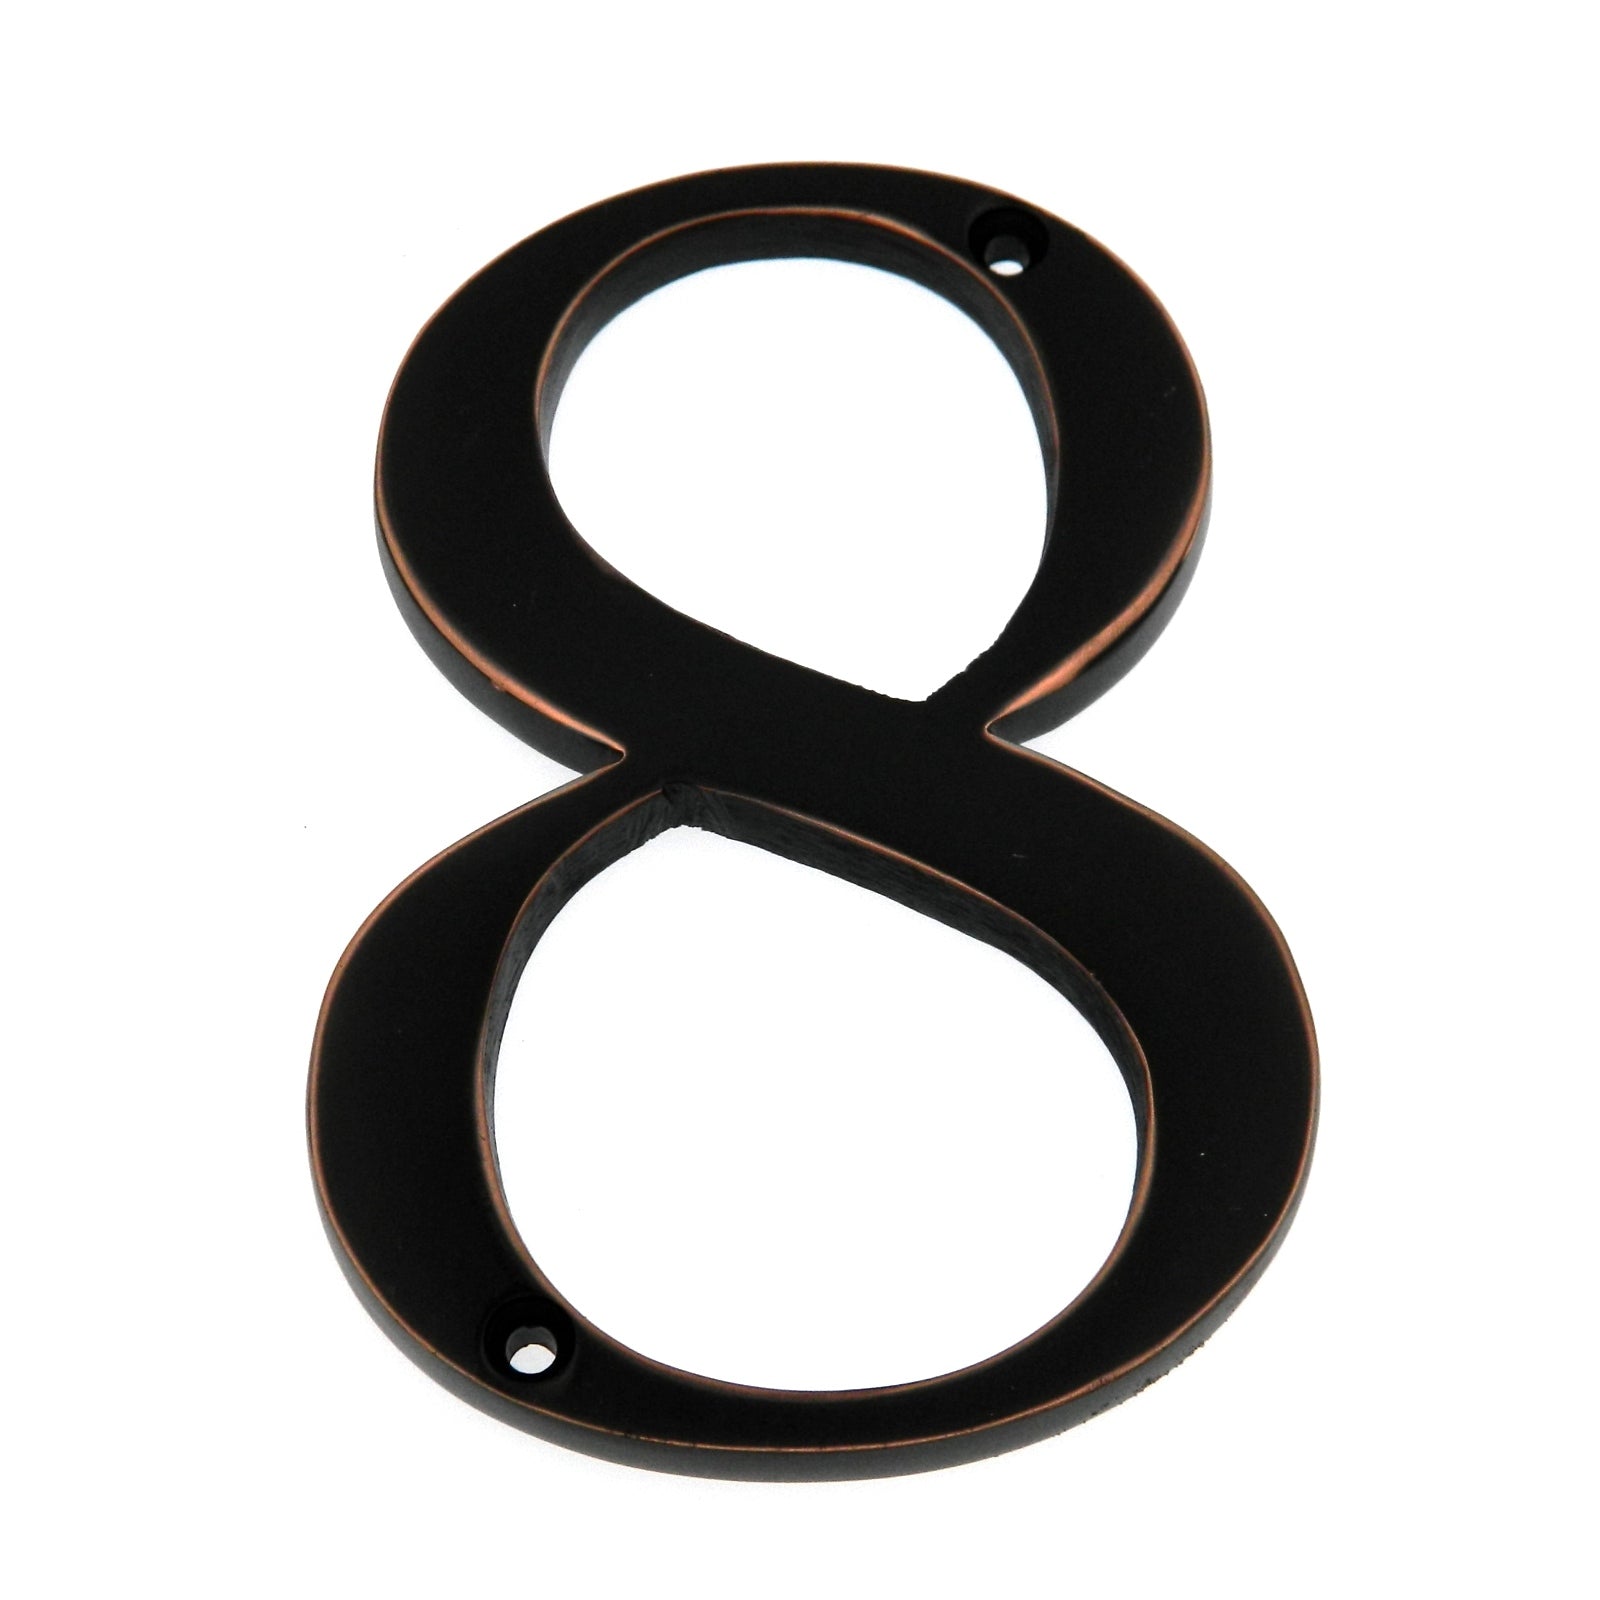 Aged Bronze Metal 4 inch Flush House Address Numbers, Bold Readable Font